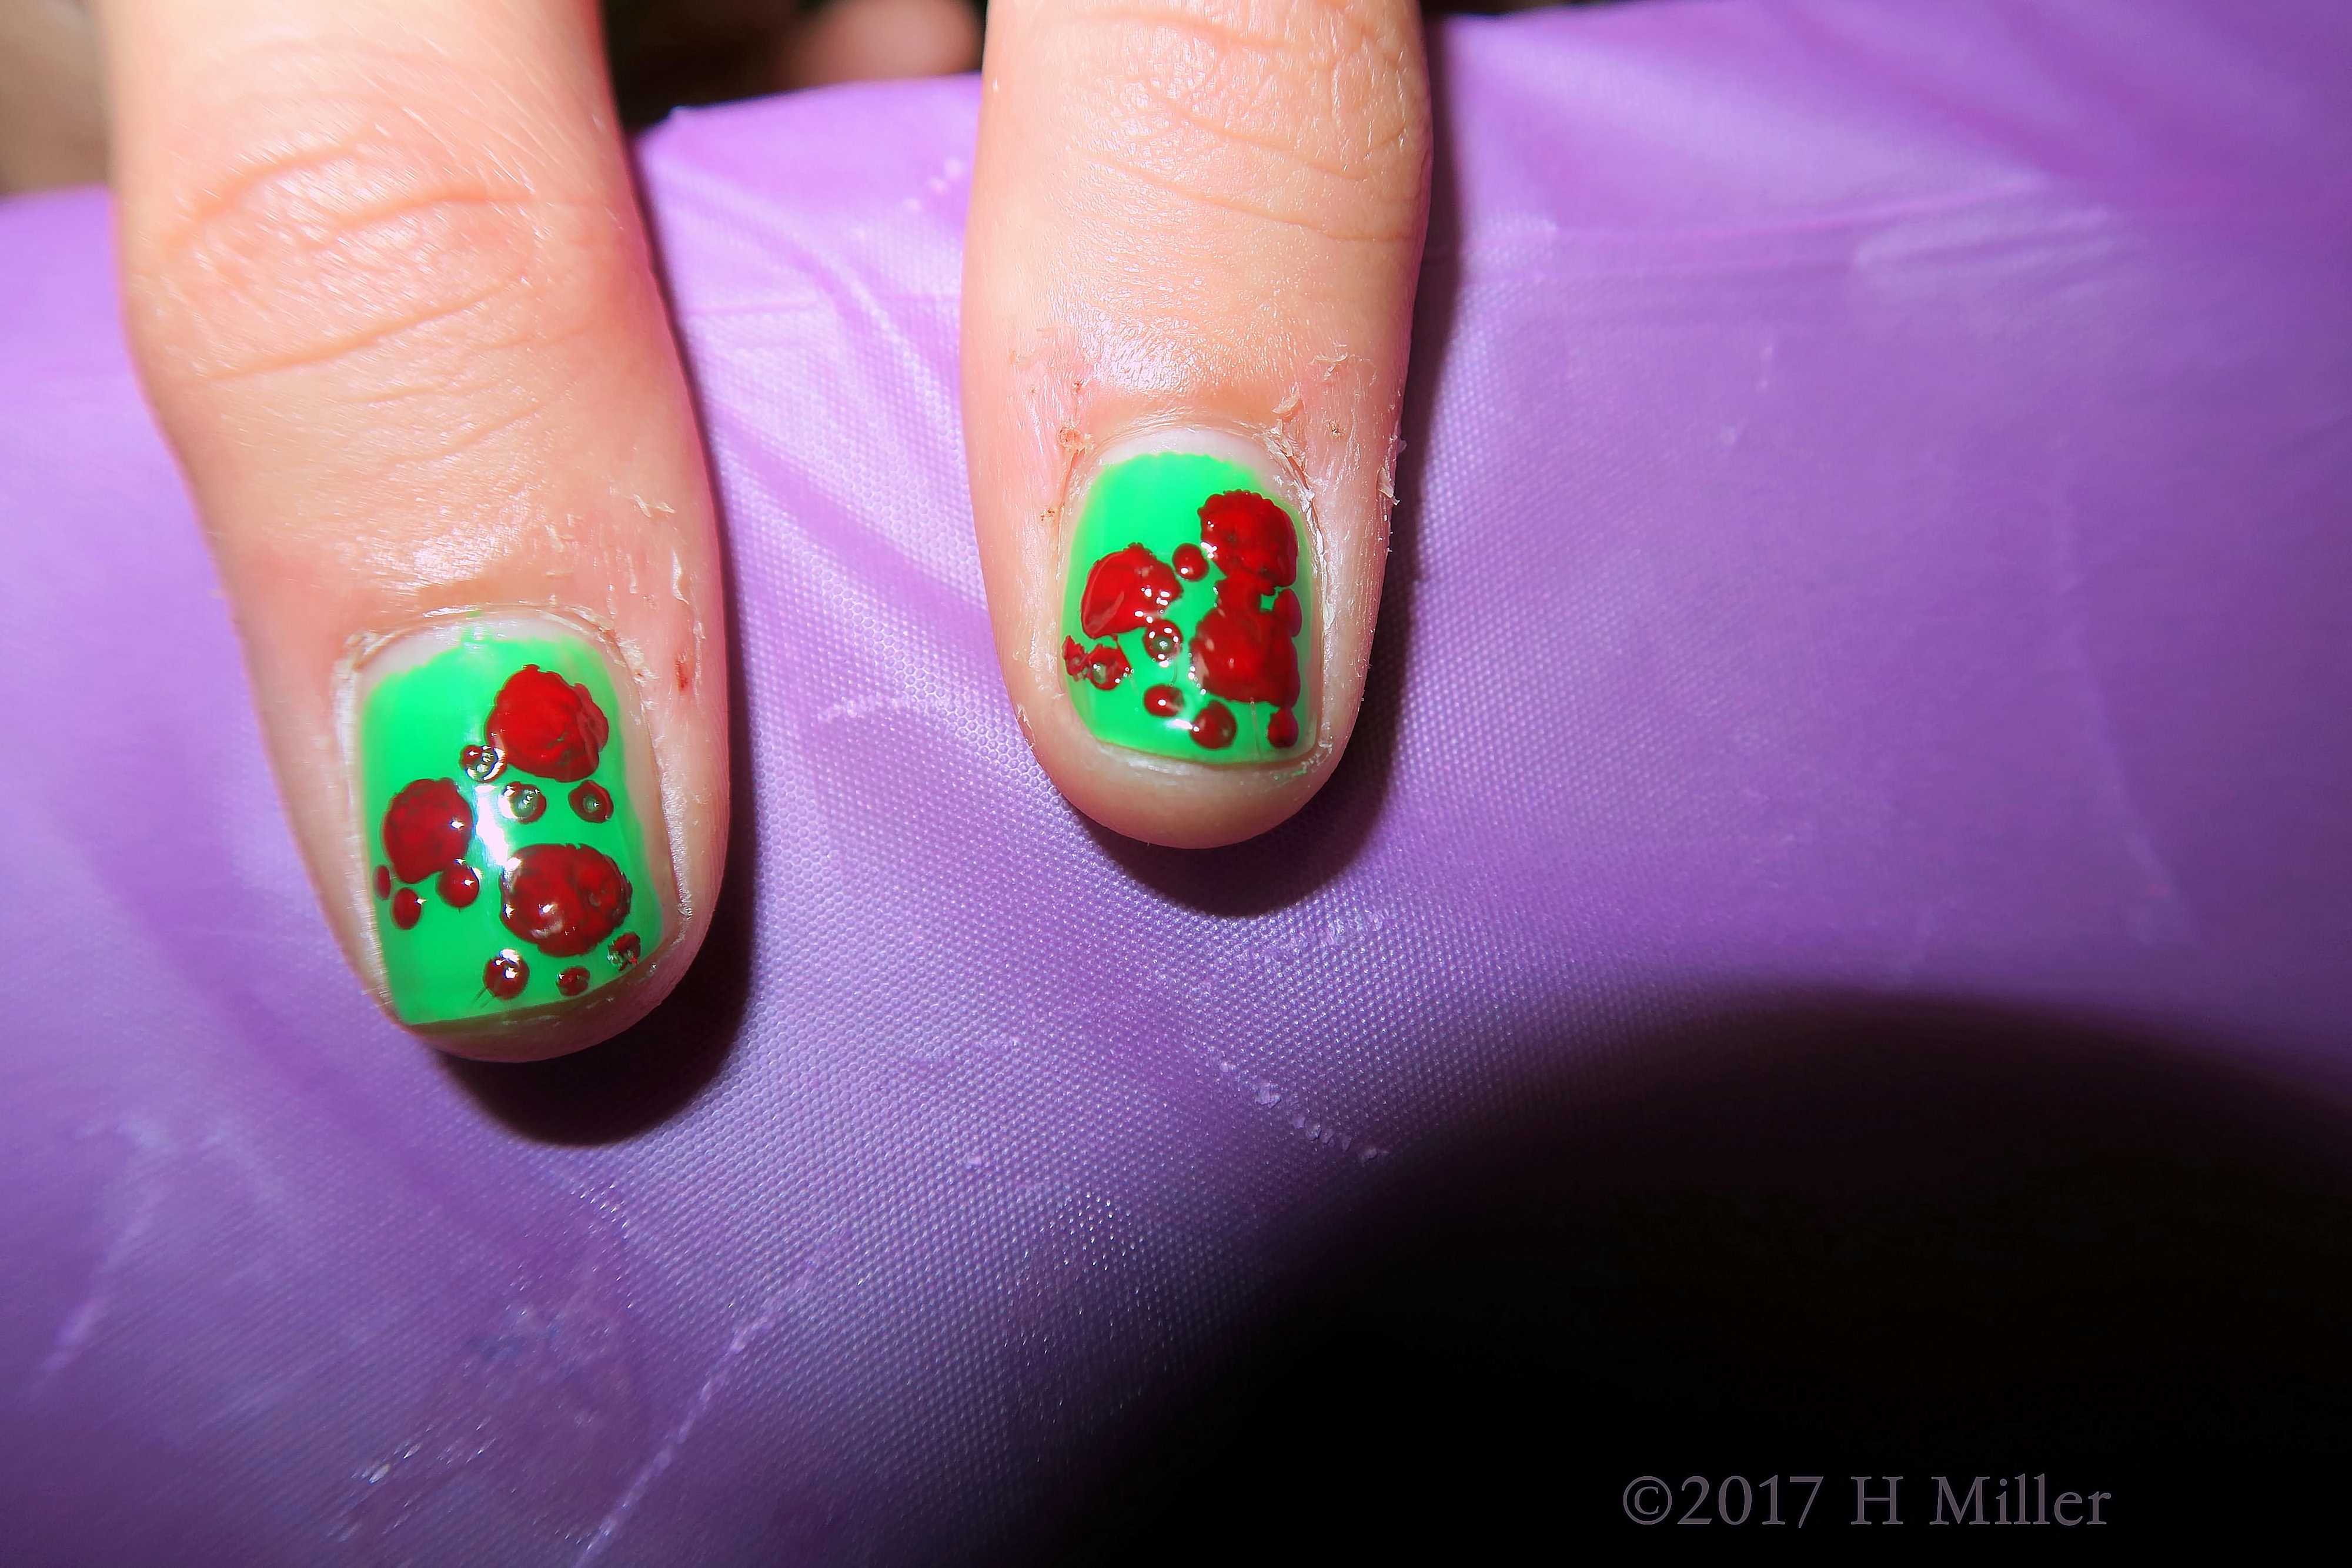 Awesome Dog Paws Kids Nail Art With Red Paws On Green Nails! 